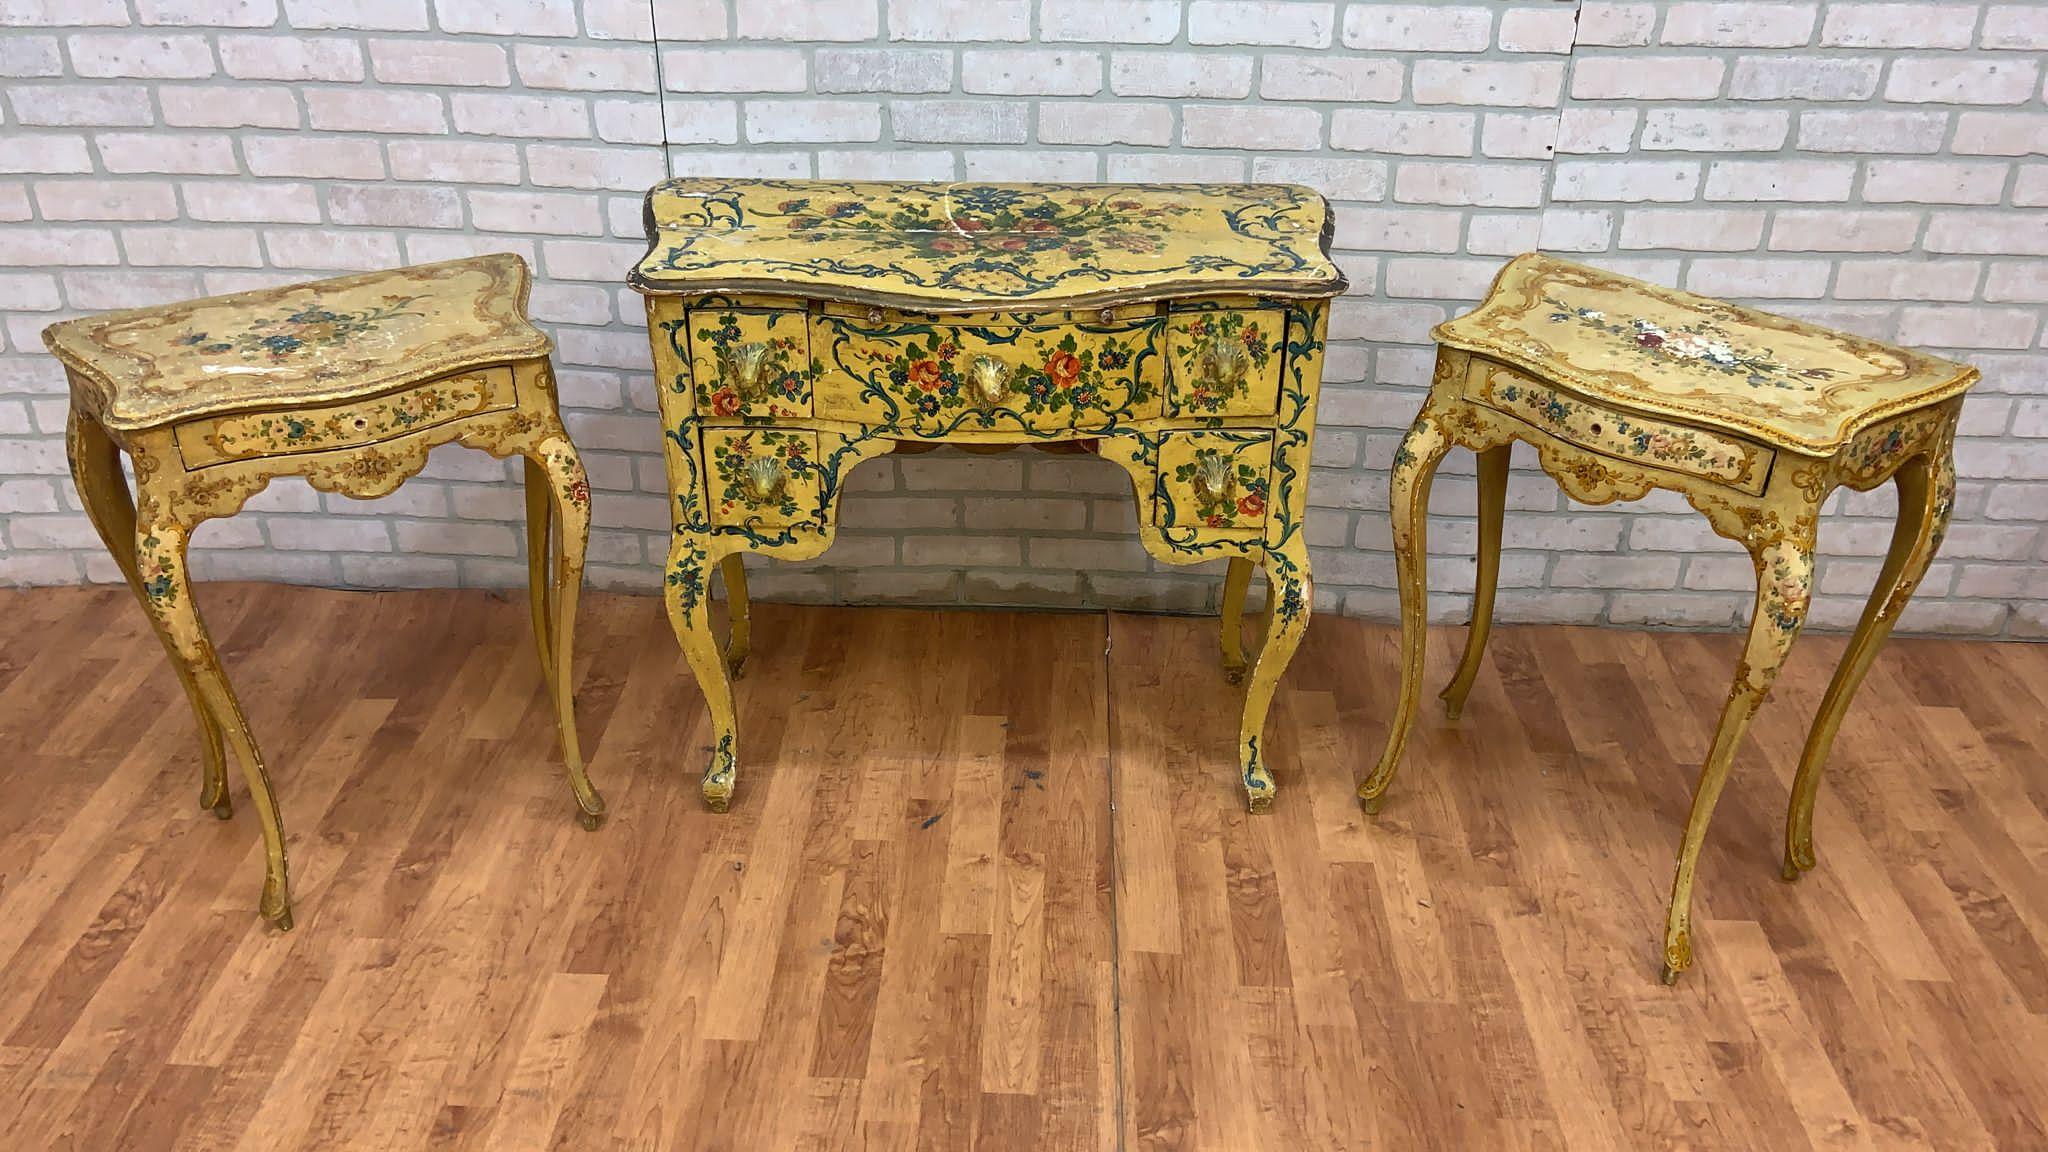 Italian Antique Rococo Style Venetian Hand Painted Vanity Desk & Side Tables, Set of 3 For Sale